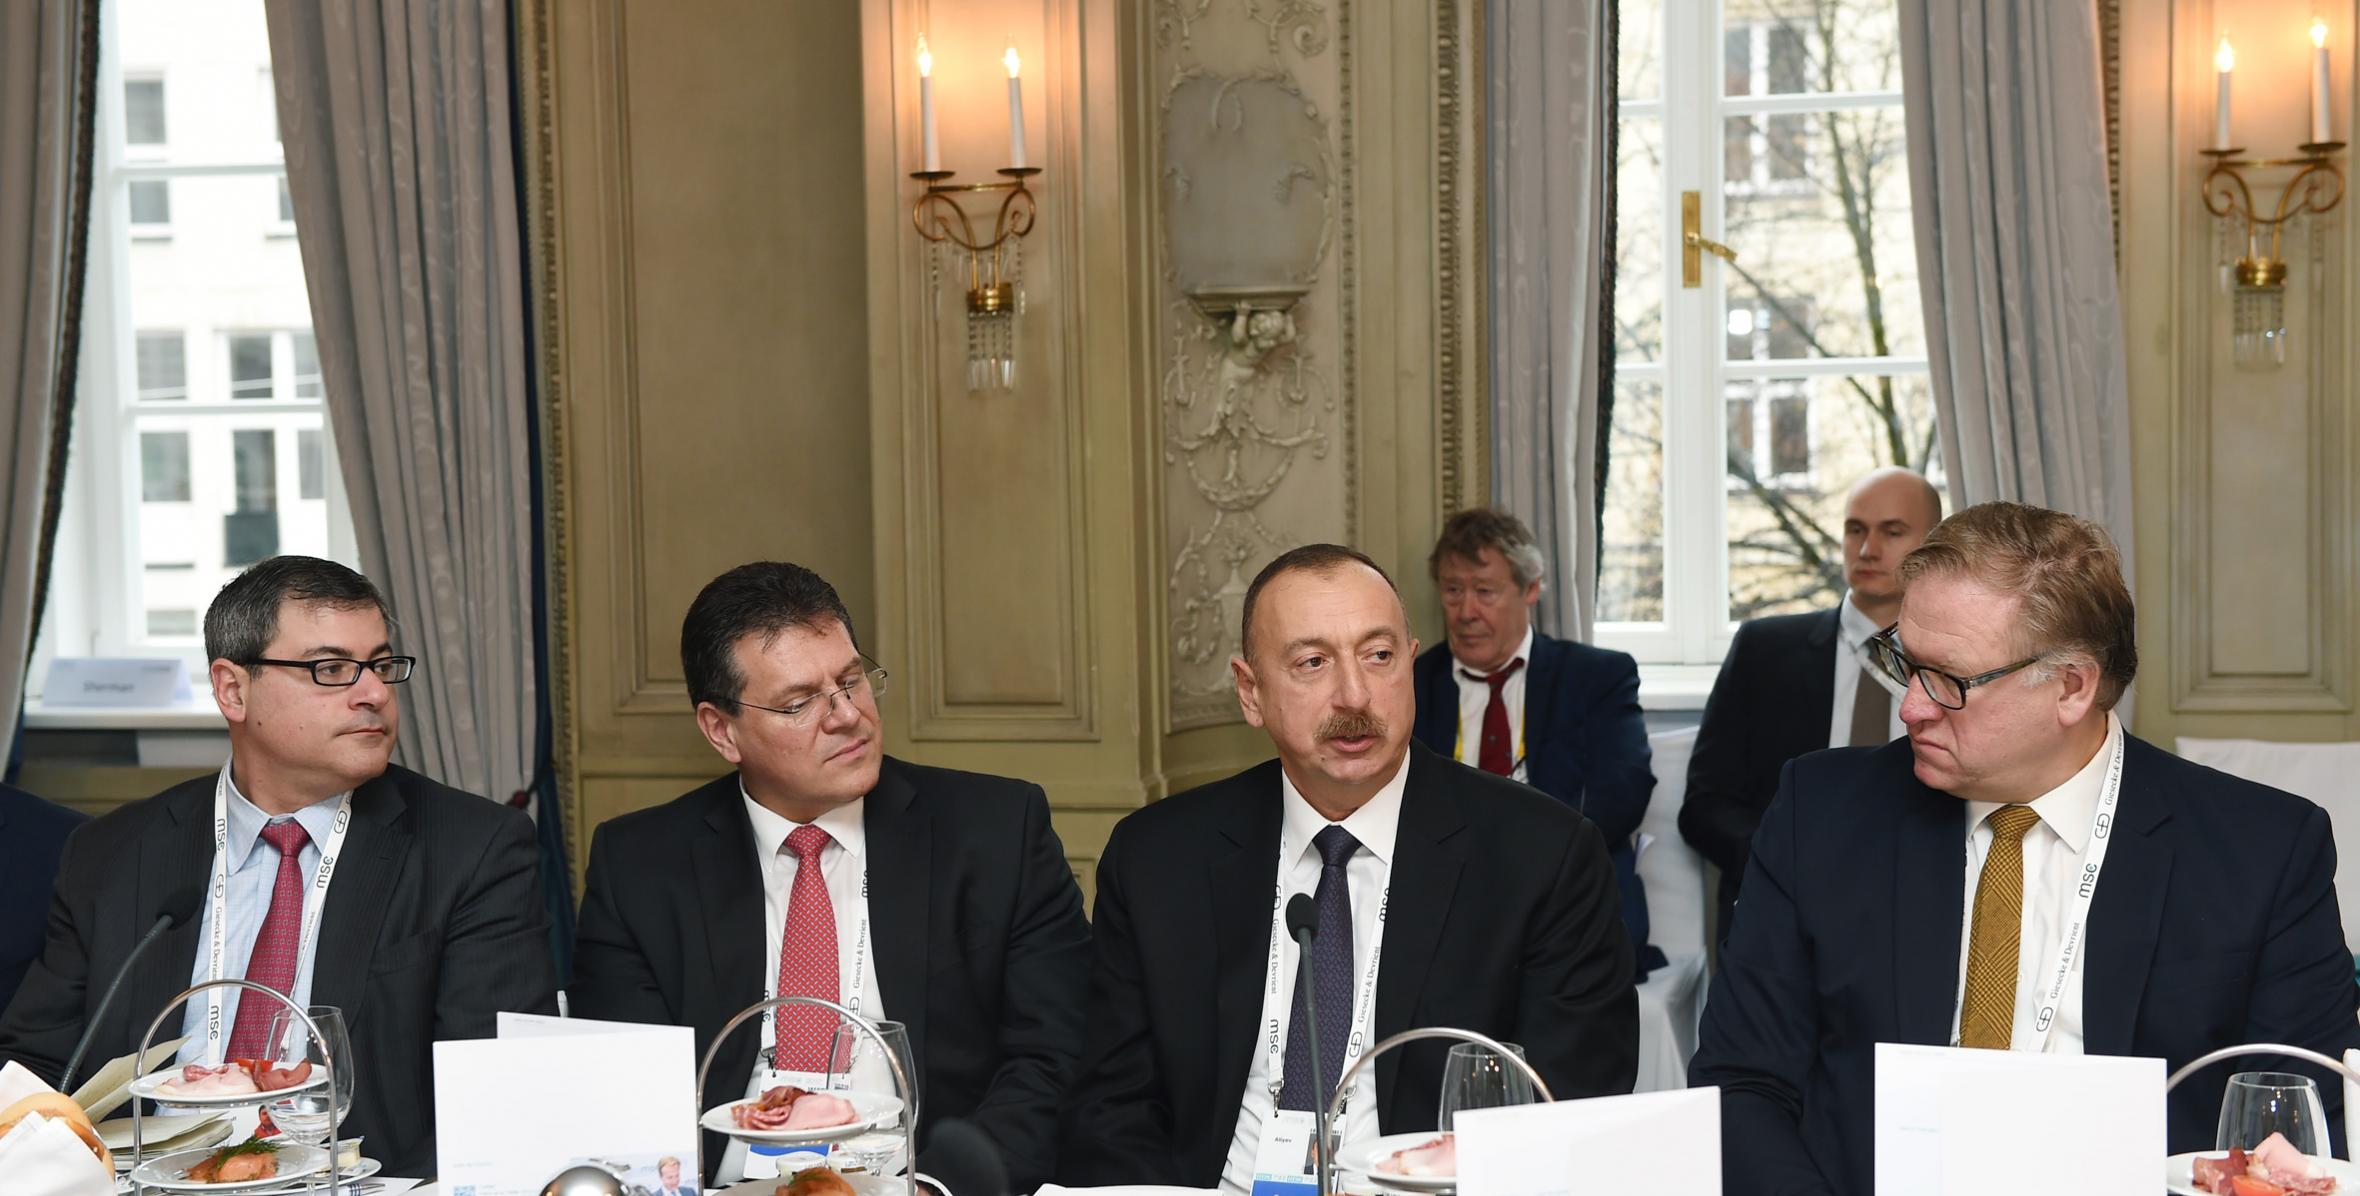 Speech by Ilham Aliyev at the roundtable of Munich Security Conference